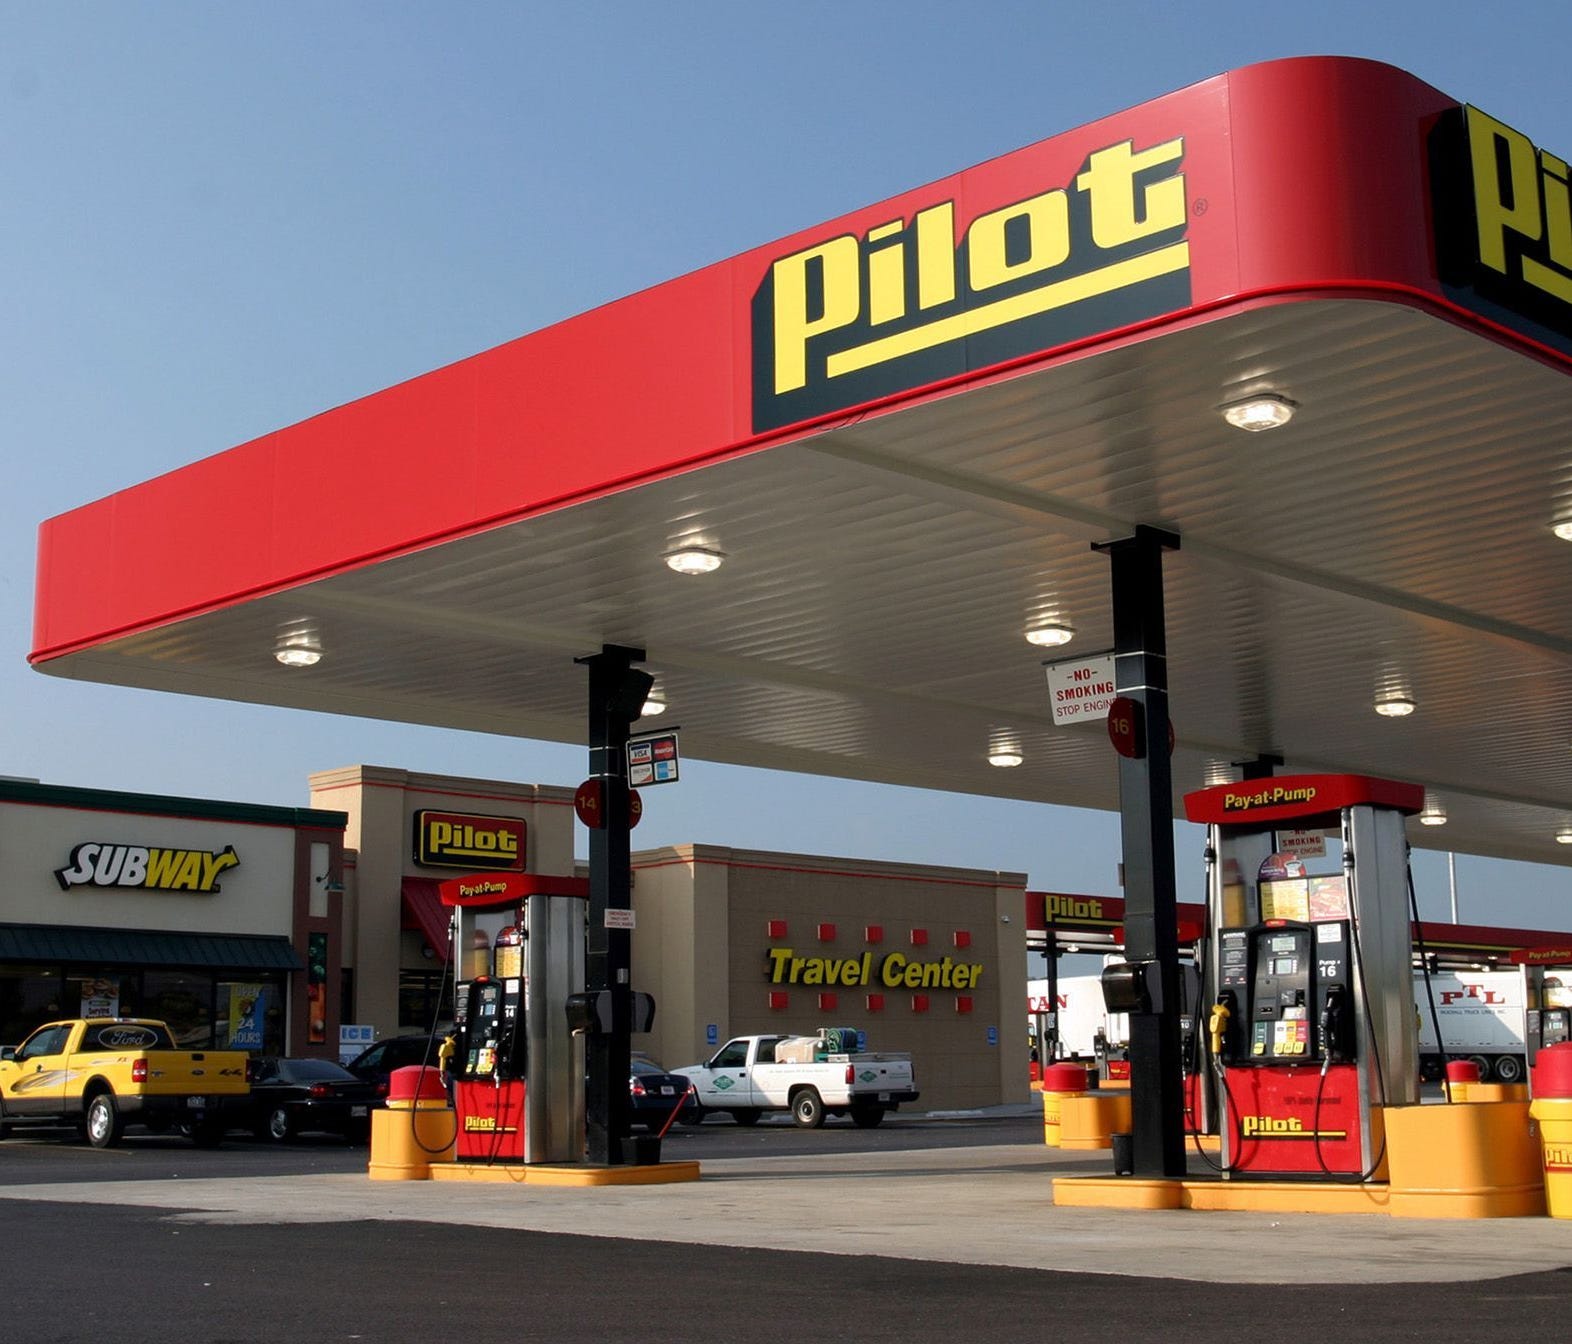 Pilot Flying J, one of the largest truck stop operators in the United States, is investing $500 million to renovate existing travel centers, including bathroom and facility upgrades.